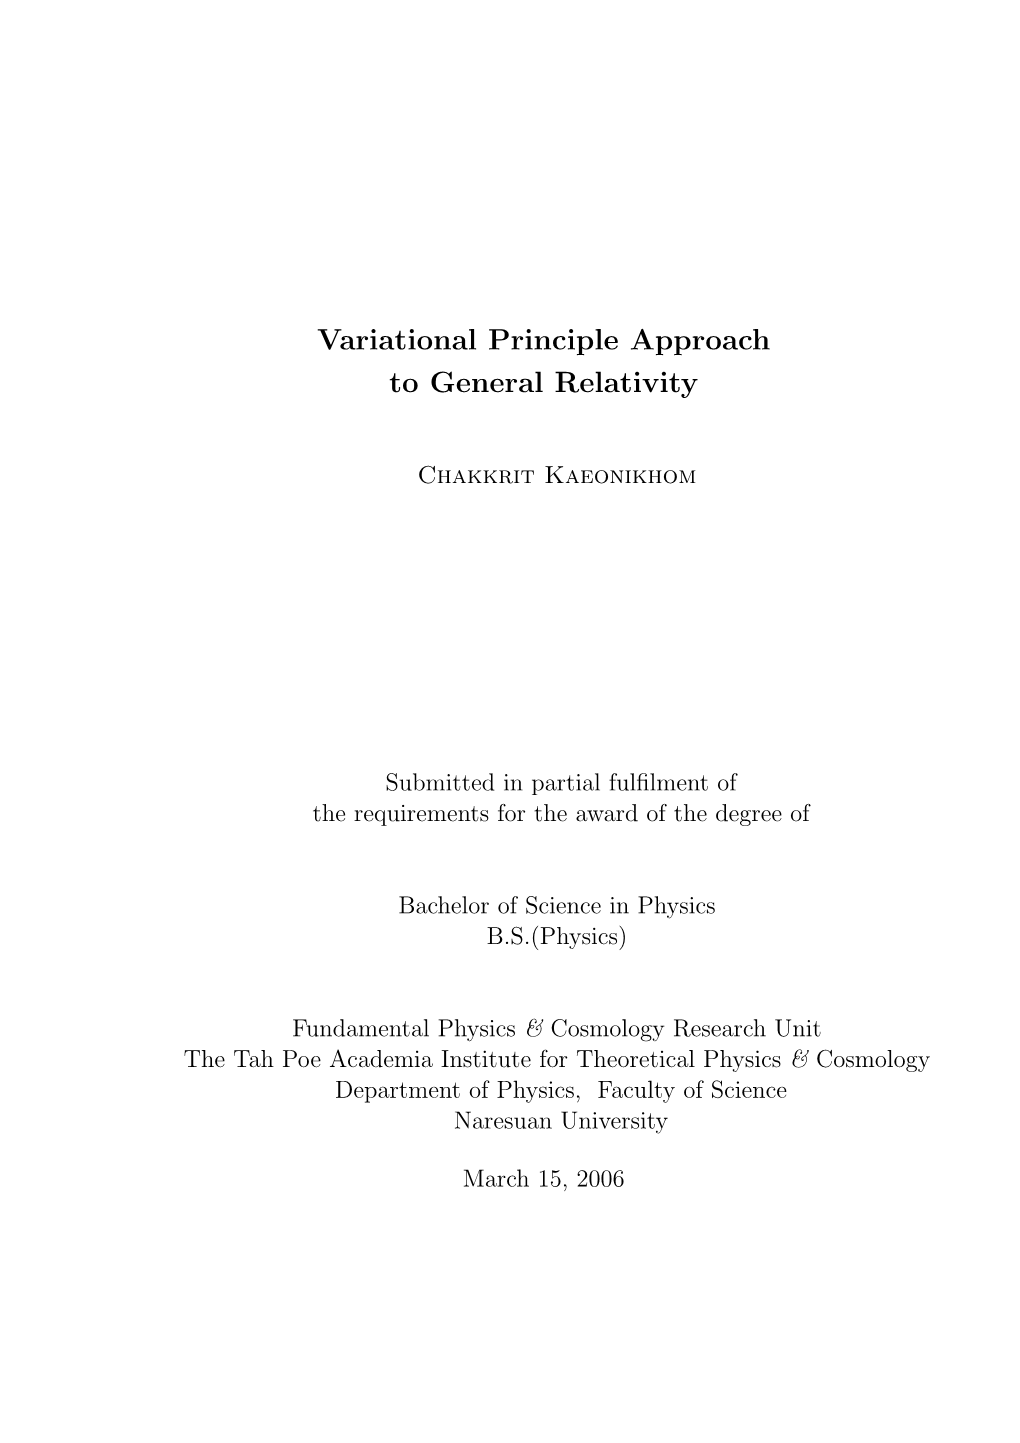 Variational Principle Approach to General Relativity